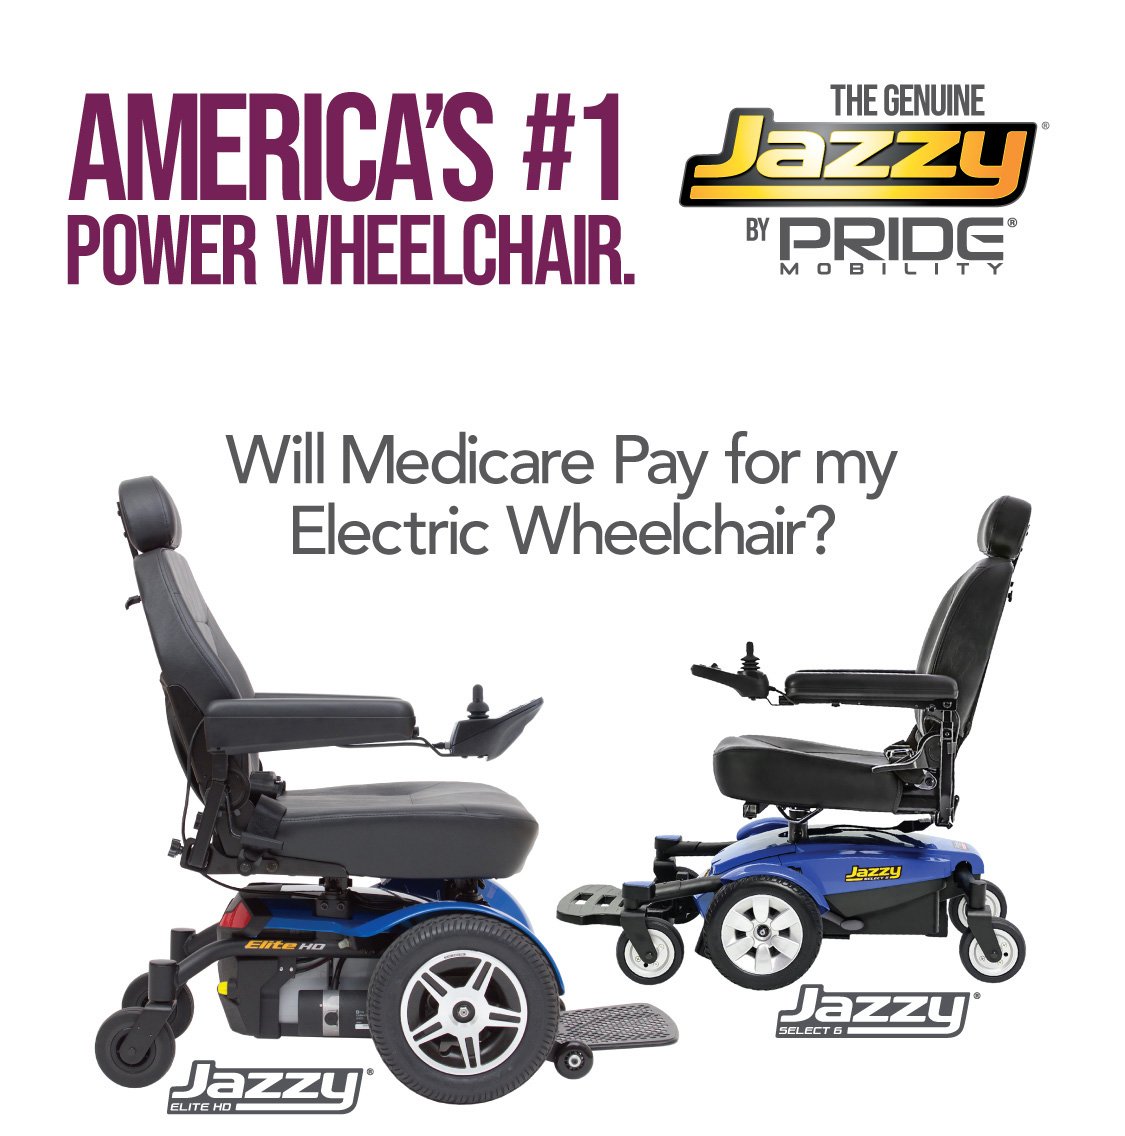 Will Medicare Pay For My Electric Wheelchar?